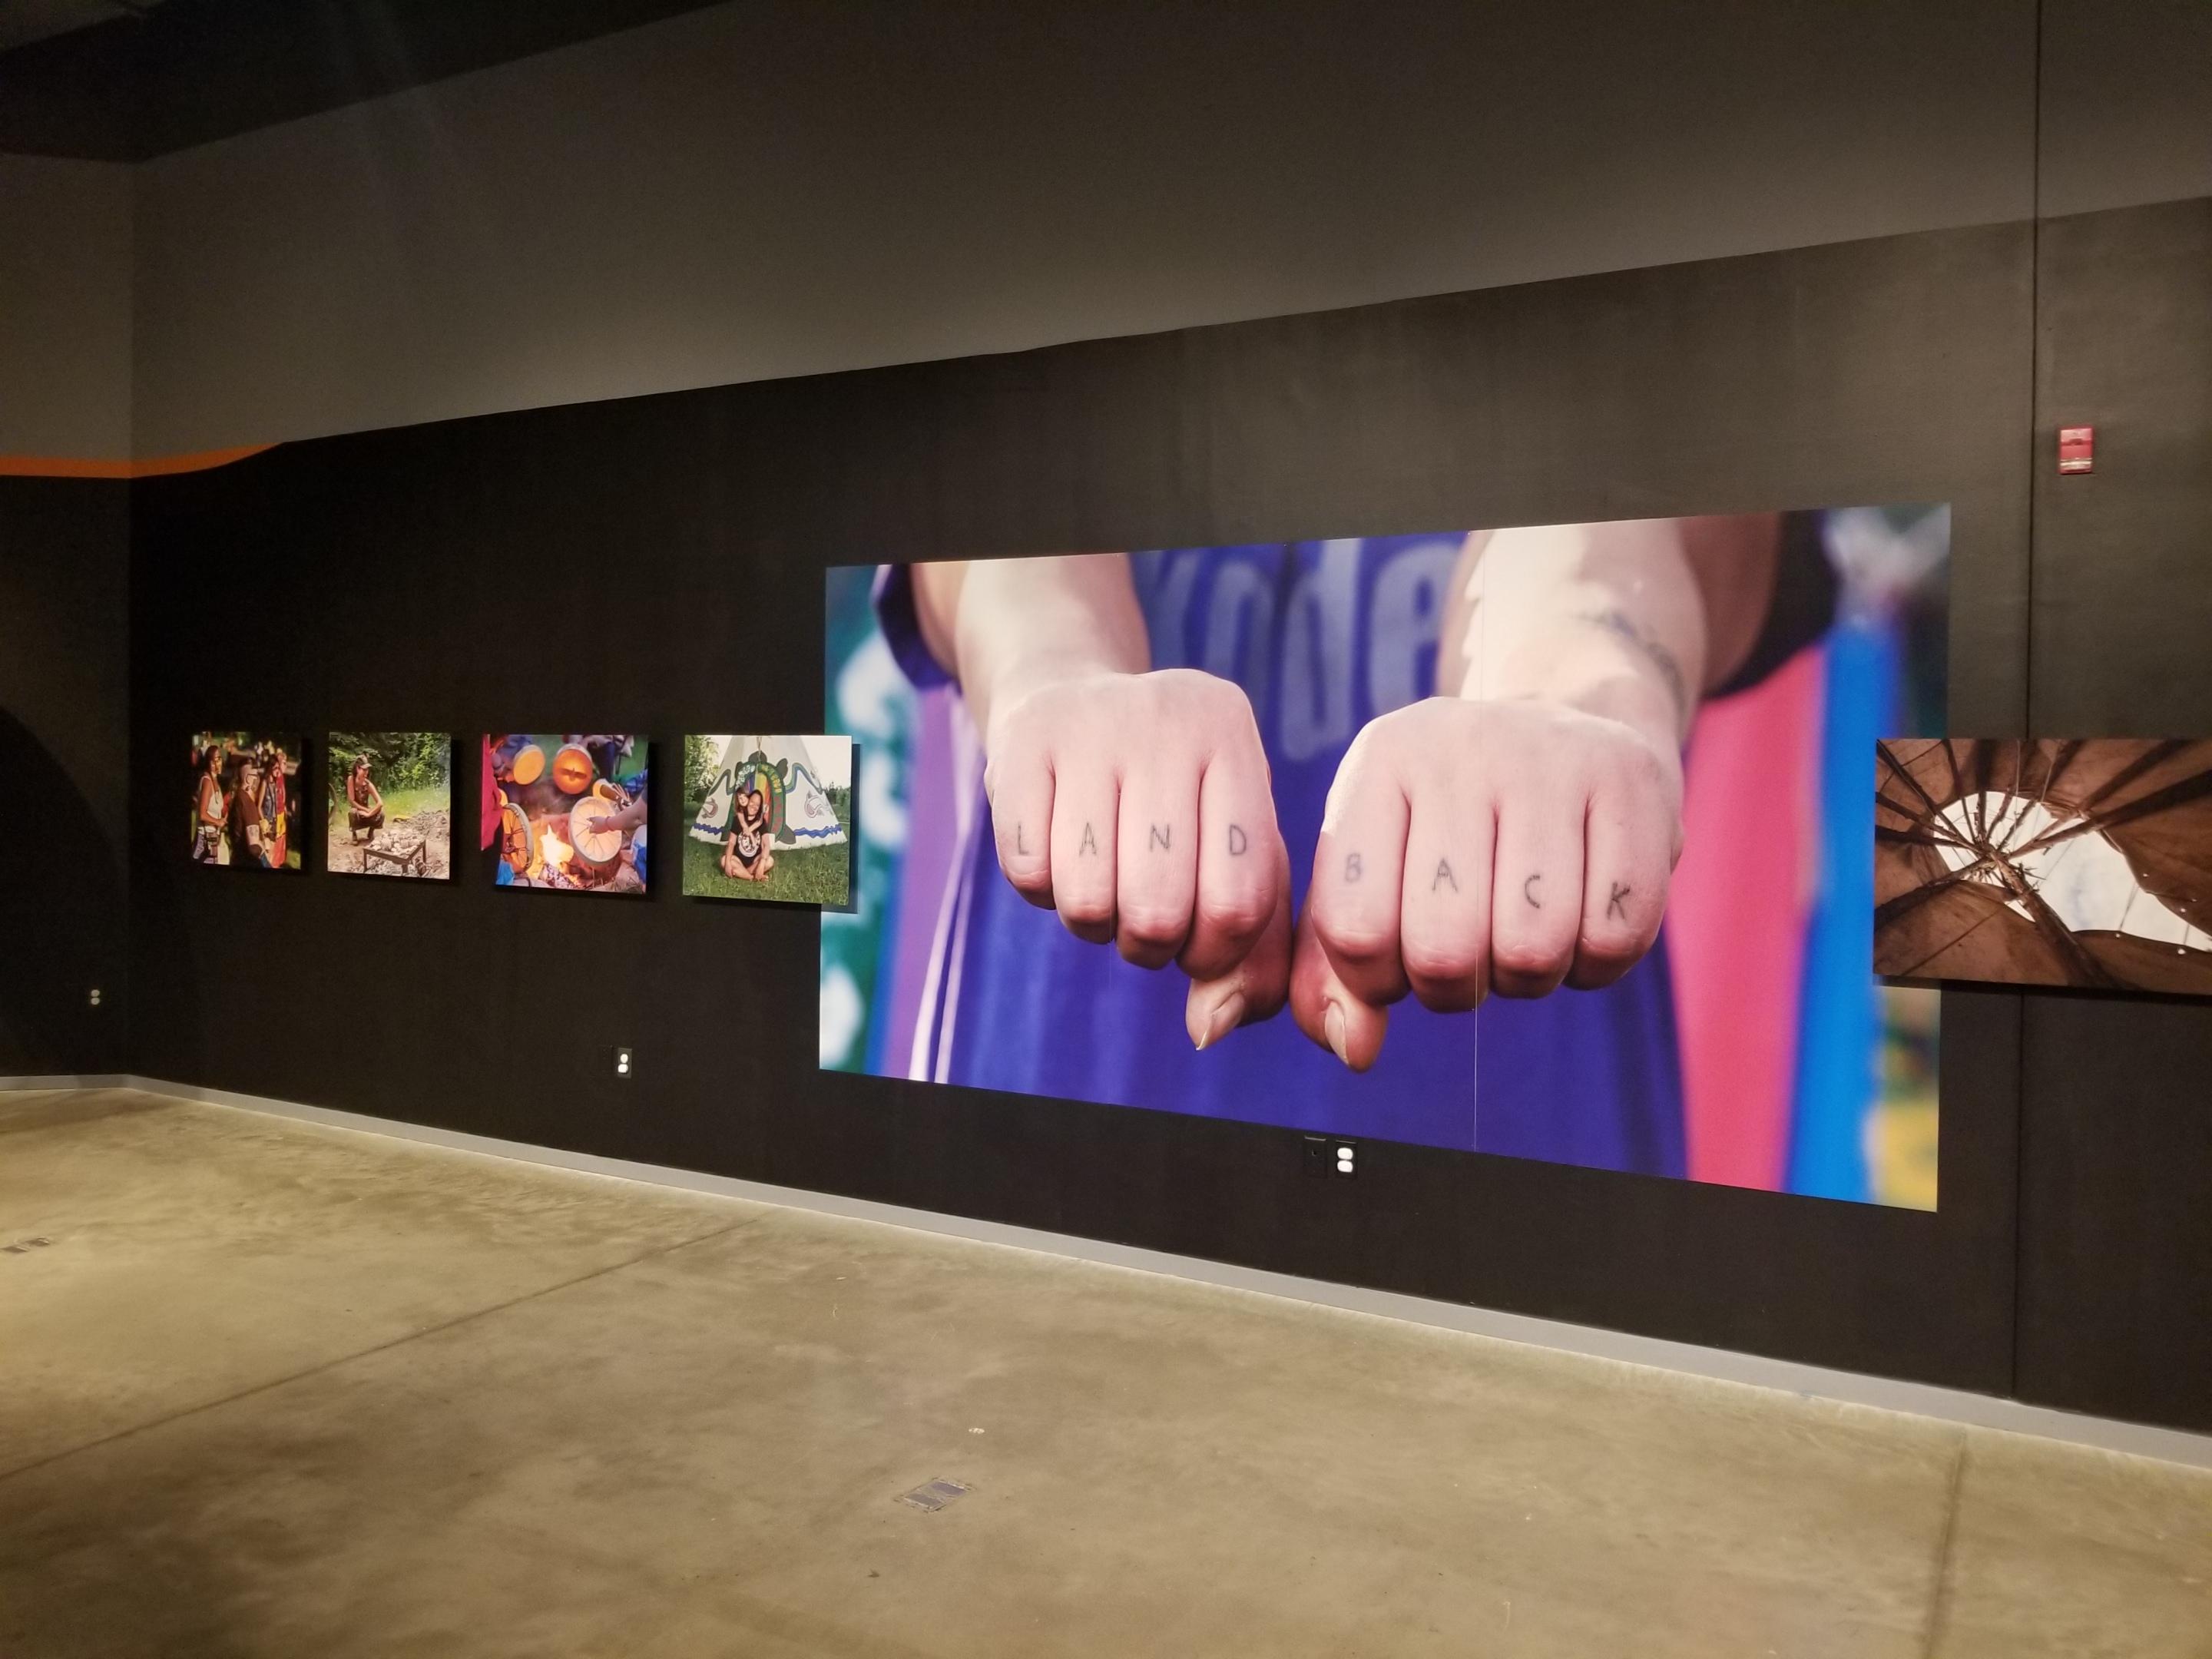 A series of photographs on a wall as part of the exhibition. The largest photo features two fists with LAND BACK written across the knuckles